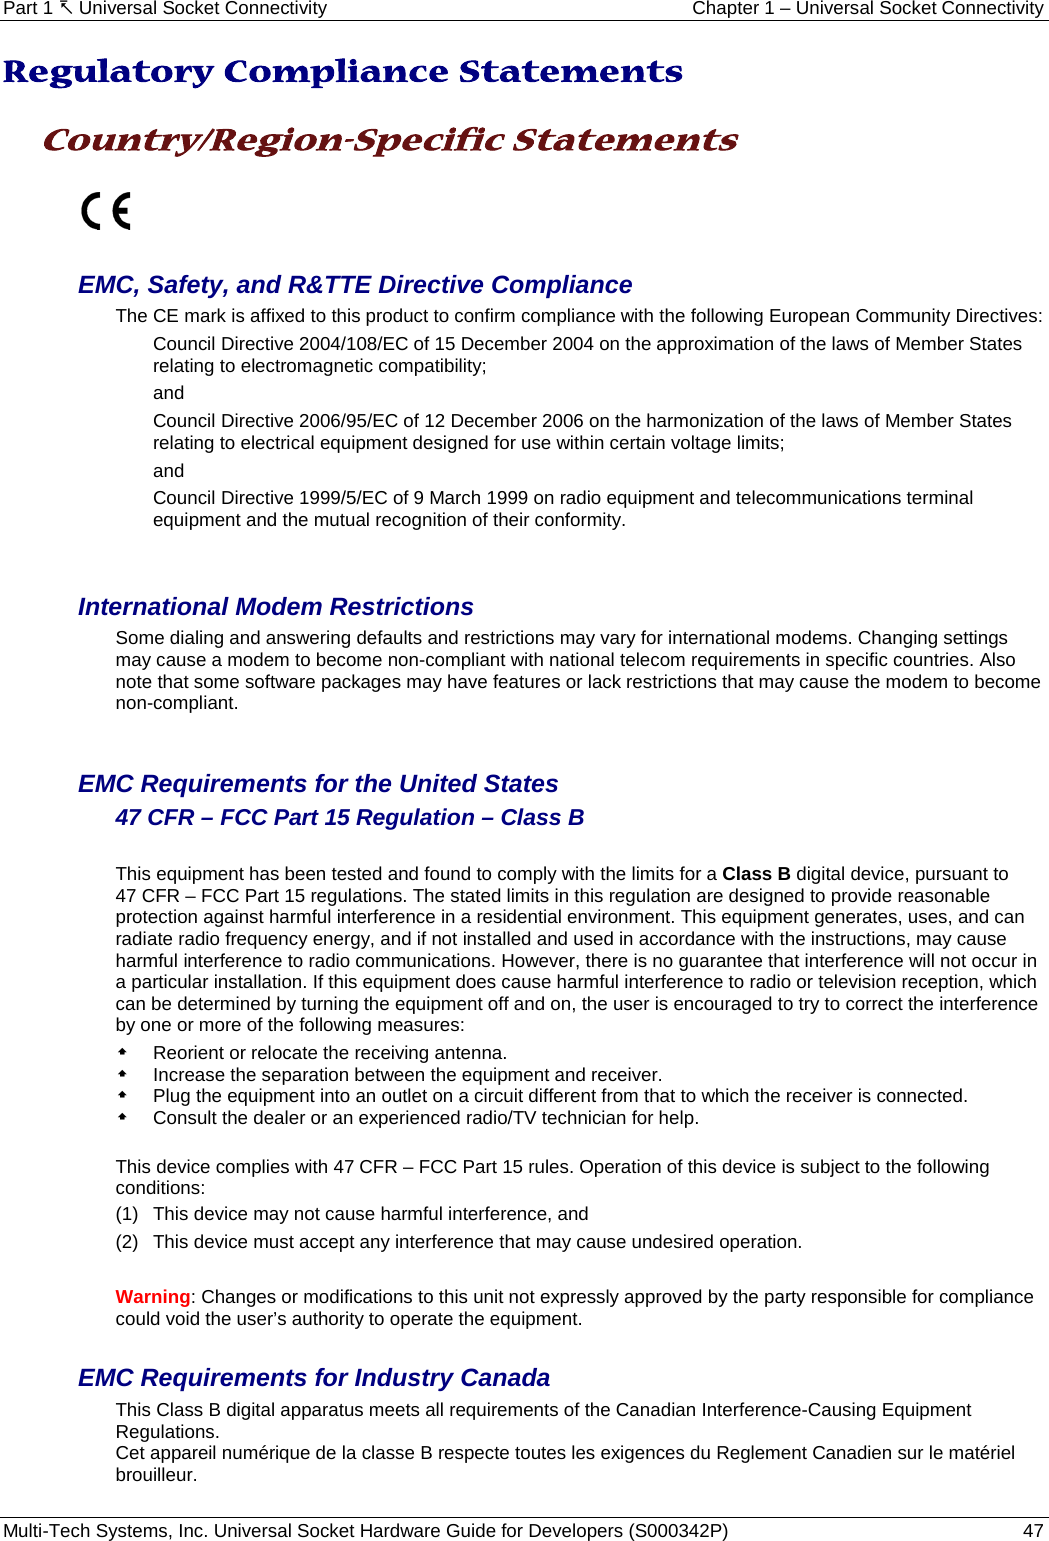 Part 1  Universal Socket Connectivity Chapter 1 – Universal Socket Connectivity Multi-Tech Systems, Inc. Universal Socket Hardware Guide for Developers (S000342P)  47  Regulatory Compliance Statements  Country/Region-Specific Statements    EMC, Safety, and R&amp;TTE Directive Compliance The CE mark is affixed to this product to confirm compliance with the following European Community Directives: Council Directive 2004/108/EC of 15 December 2004 on the approximation of the laws of Member States relating to electromagnetic compatibility;  and Council Directive 2006/95/EC of 12 December 2006 on the harmonization of the laws of Member States relating to electrical equipment designed for use within certain voltage limits; and Council Directive 1999/5/EC of 9 March 1999 on radio equipment and telecommunications terminal equipment and the mutual recognition of their conformity.   International Modem Restrictions Some dialing and answering defaults and restrictions may vary for international modems. Changing settings may cause a modem to become non-compliant with national telecom requirements in specific countries. Also note that some software packages may have features or lack restrictions that may cause the modem to become non-compliant.   EMC Requirements for the United States 47 CFR – FCC Part 15 Regulation – Class B  This equipment has been tested and found to comply with the limits for a Class B digital device, pursuant to  47 CFR – FCC Part 15 regulations. The stated limits in this regulation are designed to provide reasonable protection against harmful interference in a residential environment. This equipment generates, uses, and can radiate radio frequency energy, and if not installed and used in accordance with the instructions, may cause harmful interference to radio communications. However, there is no guarantee that interference will not occur in a particular installation. If this equipment does cause harmful interference to radio or television reception, which can be determined by turning the equipment off and on, the user is encouraged to try to correct the interference by one or more of the following measures:   Reorient or relocate the receiving antenna.  Increase the separation between the equipment and receiver.  Plug the equipment into an outlet on a circuit different from that to which the receiver is connected.  Consult the dealer or an experienced radio/TV technician for help.  This device complies with 47 CFR – FCC Part 15 rules. Operation of this device is subject to the following conditions:  (1)  This device may not cause harmful interference, and  (2)  This device must accept any interference that may cause undesired operation.  Warning: Changes or modifications to this unit not expressly approved by the party responsible for compliance could void the user’s authority to operate the equipment.  EMC Requirements for Industry Canada This Class B digital apparatus meets all requirements of the Canadian Interference-Causing Equipment Regulations. Cet appareil numérique de la classe B respecte toutes les exigences du Reglement Canadien sur le matériel brouilleur.   